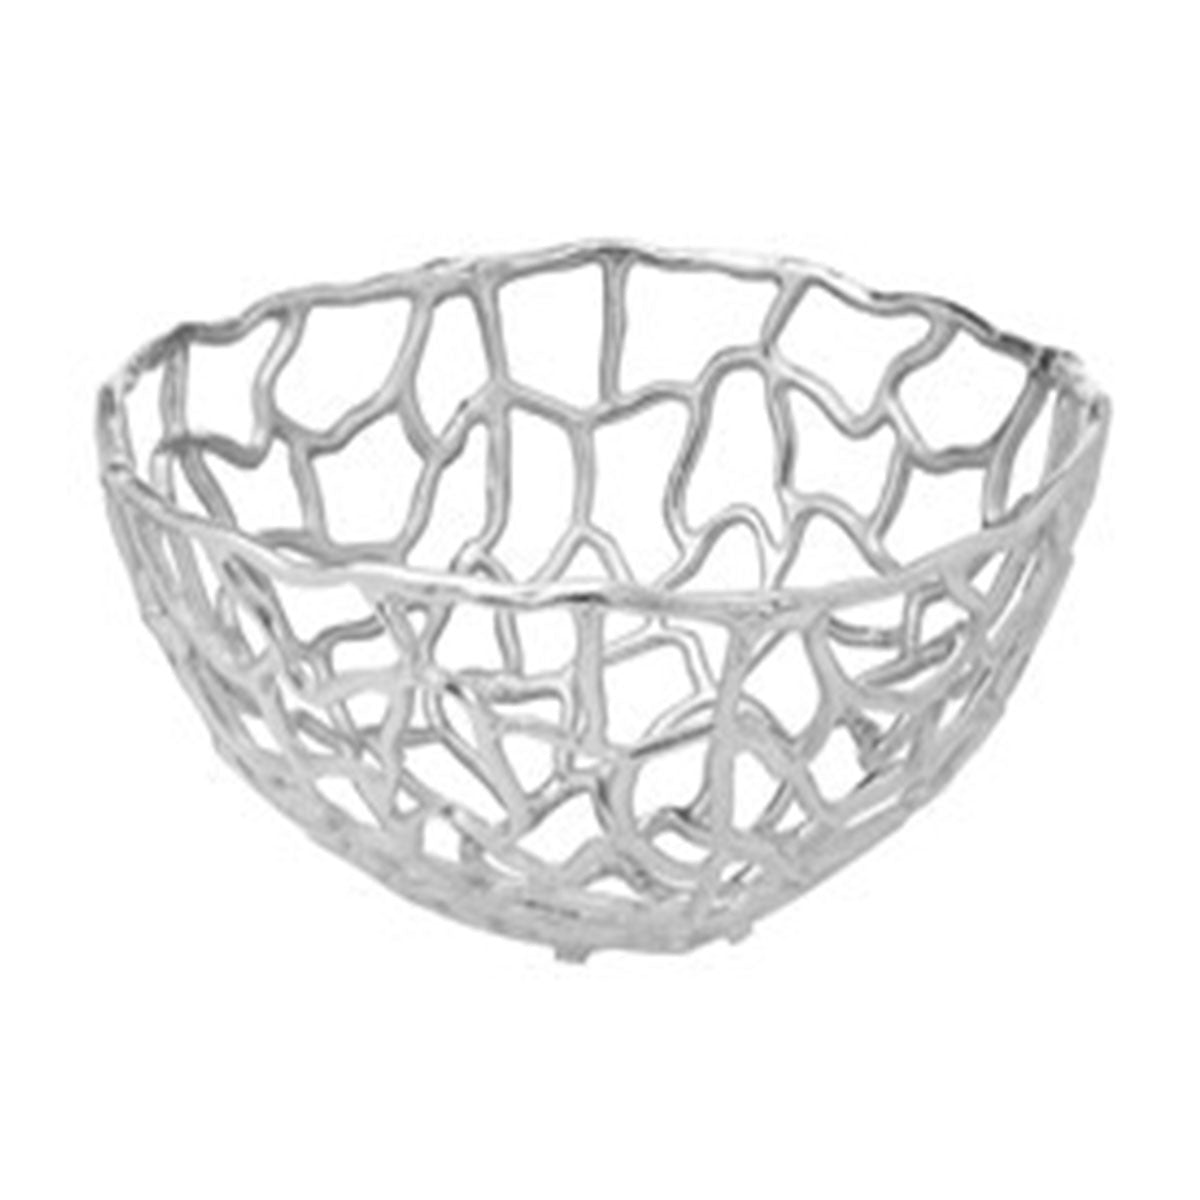 Ohlson Silver Perforated Bowl Large